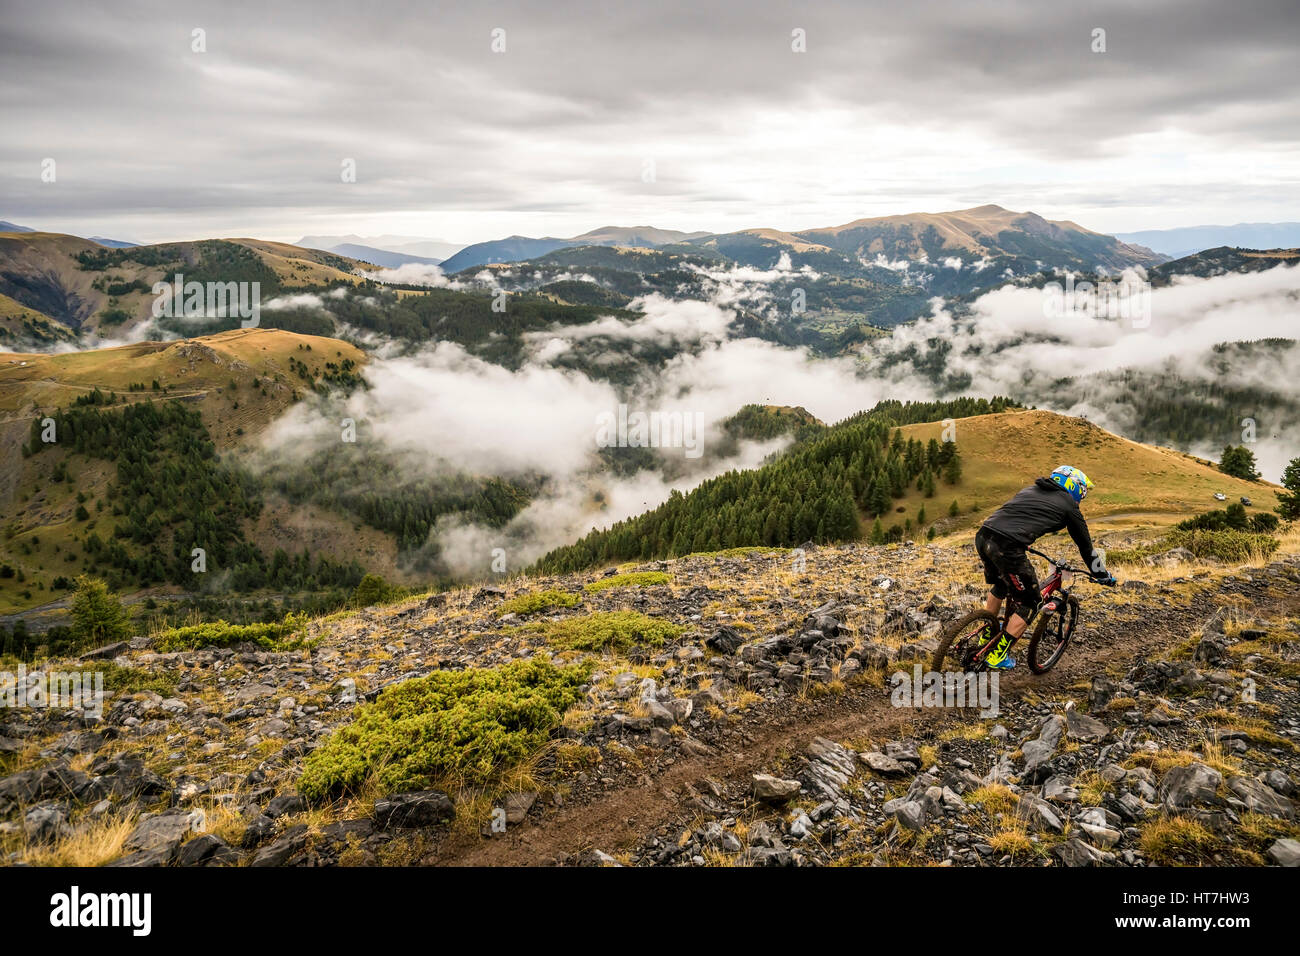 A Mountain Bike Rider Gets Some Saddle Time In A Cold Rainy Fall Day In Valberg, France Stock Photo